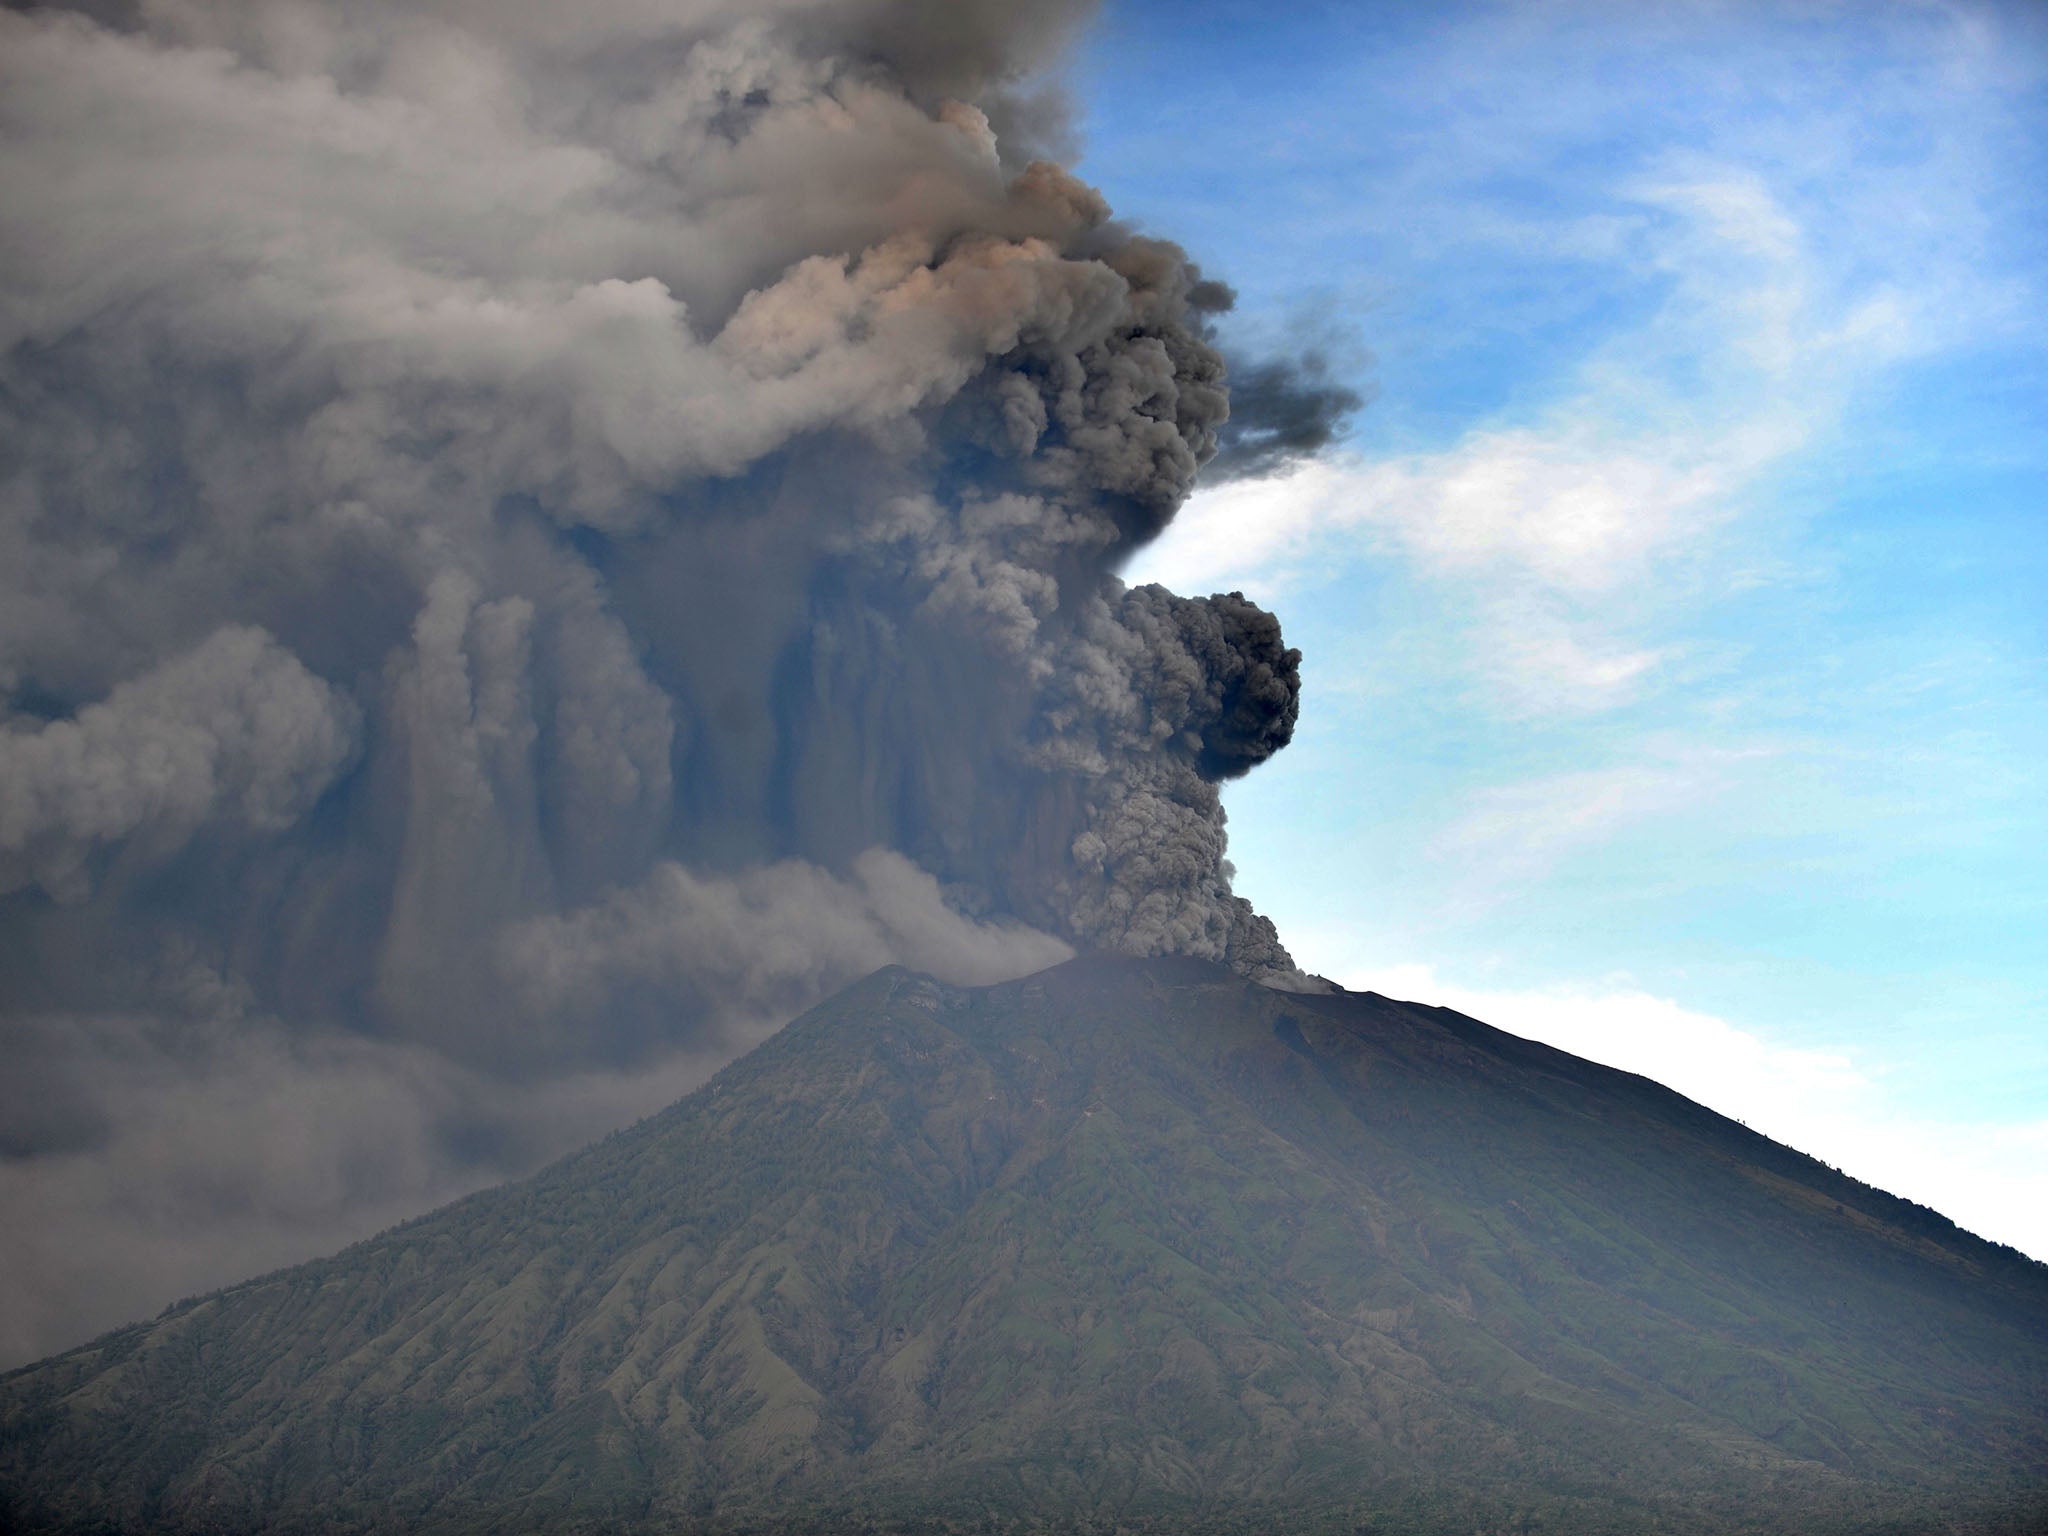  Bali volcano  on highest eruption alert as 100 000 told to 